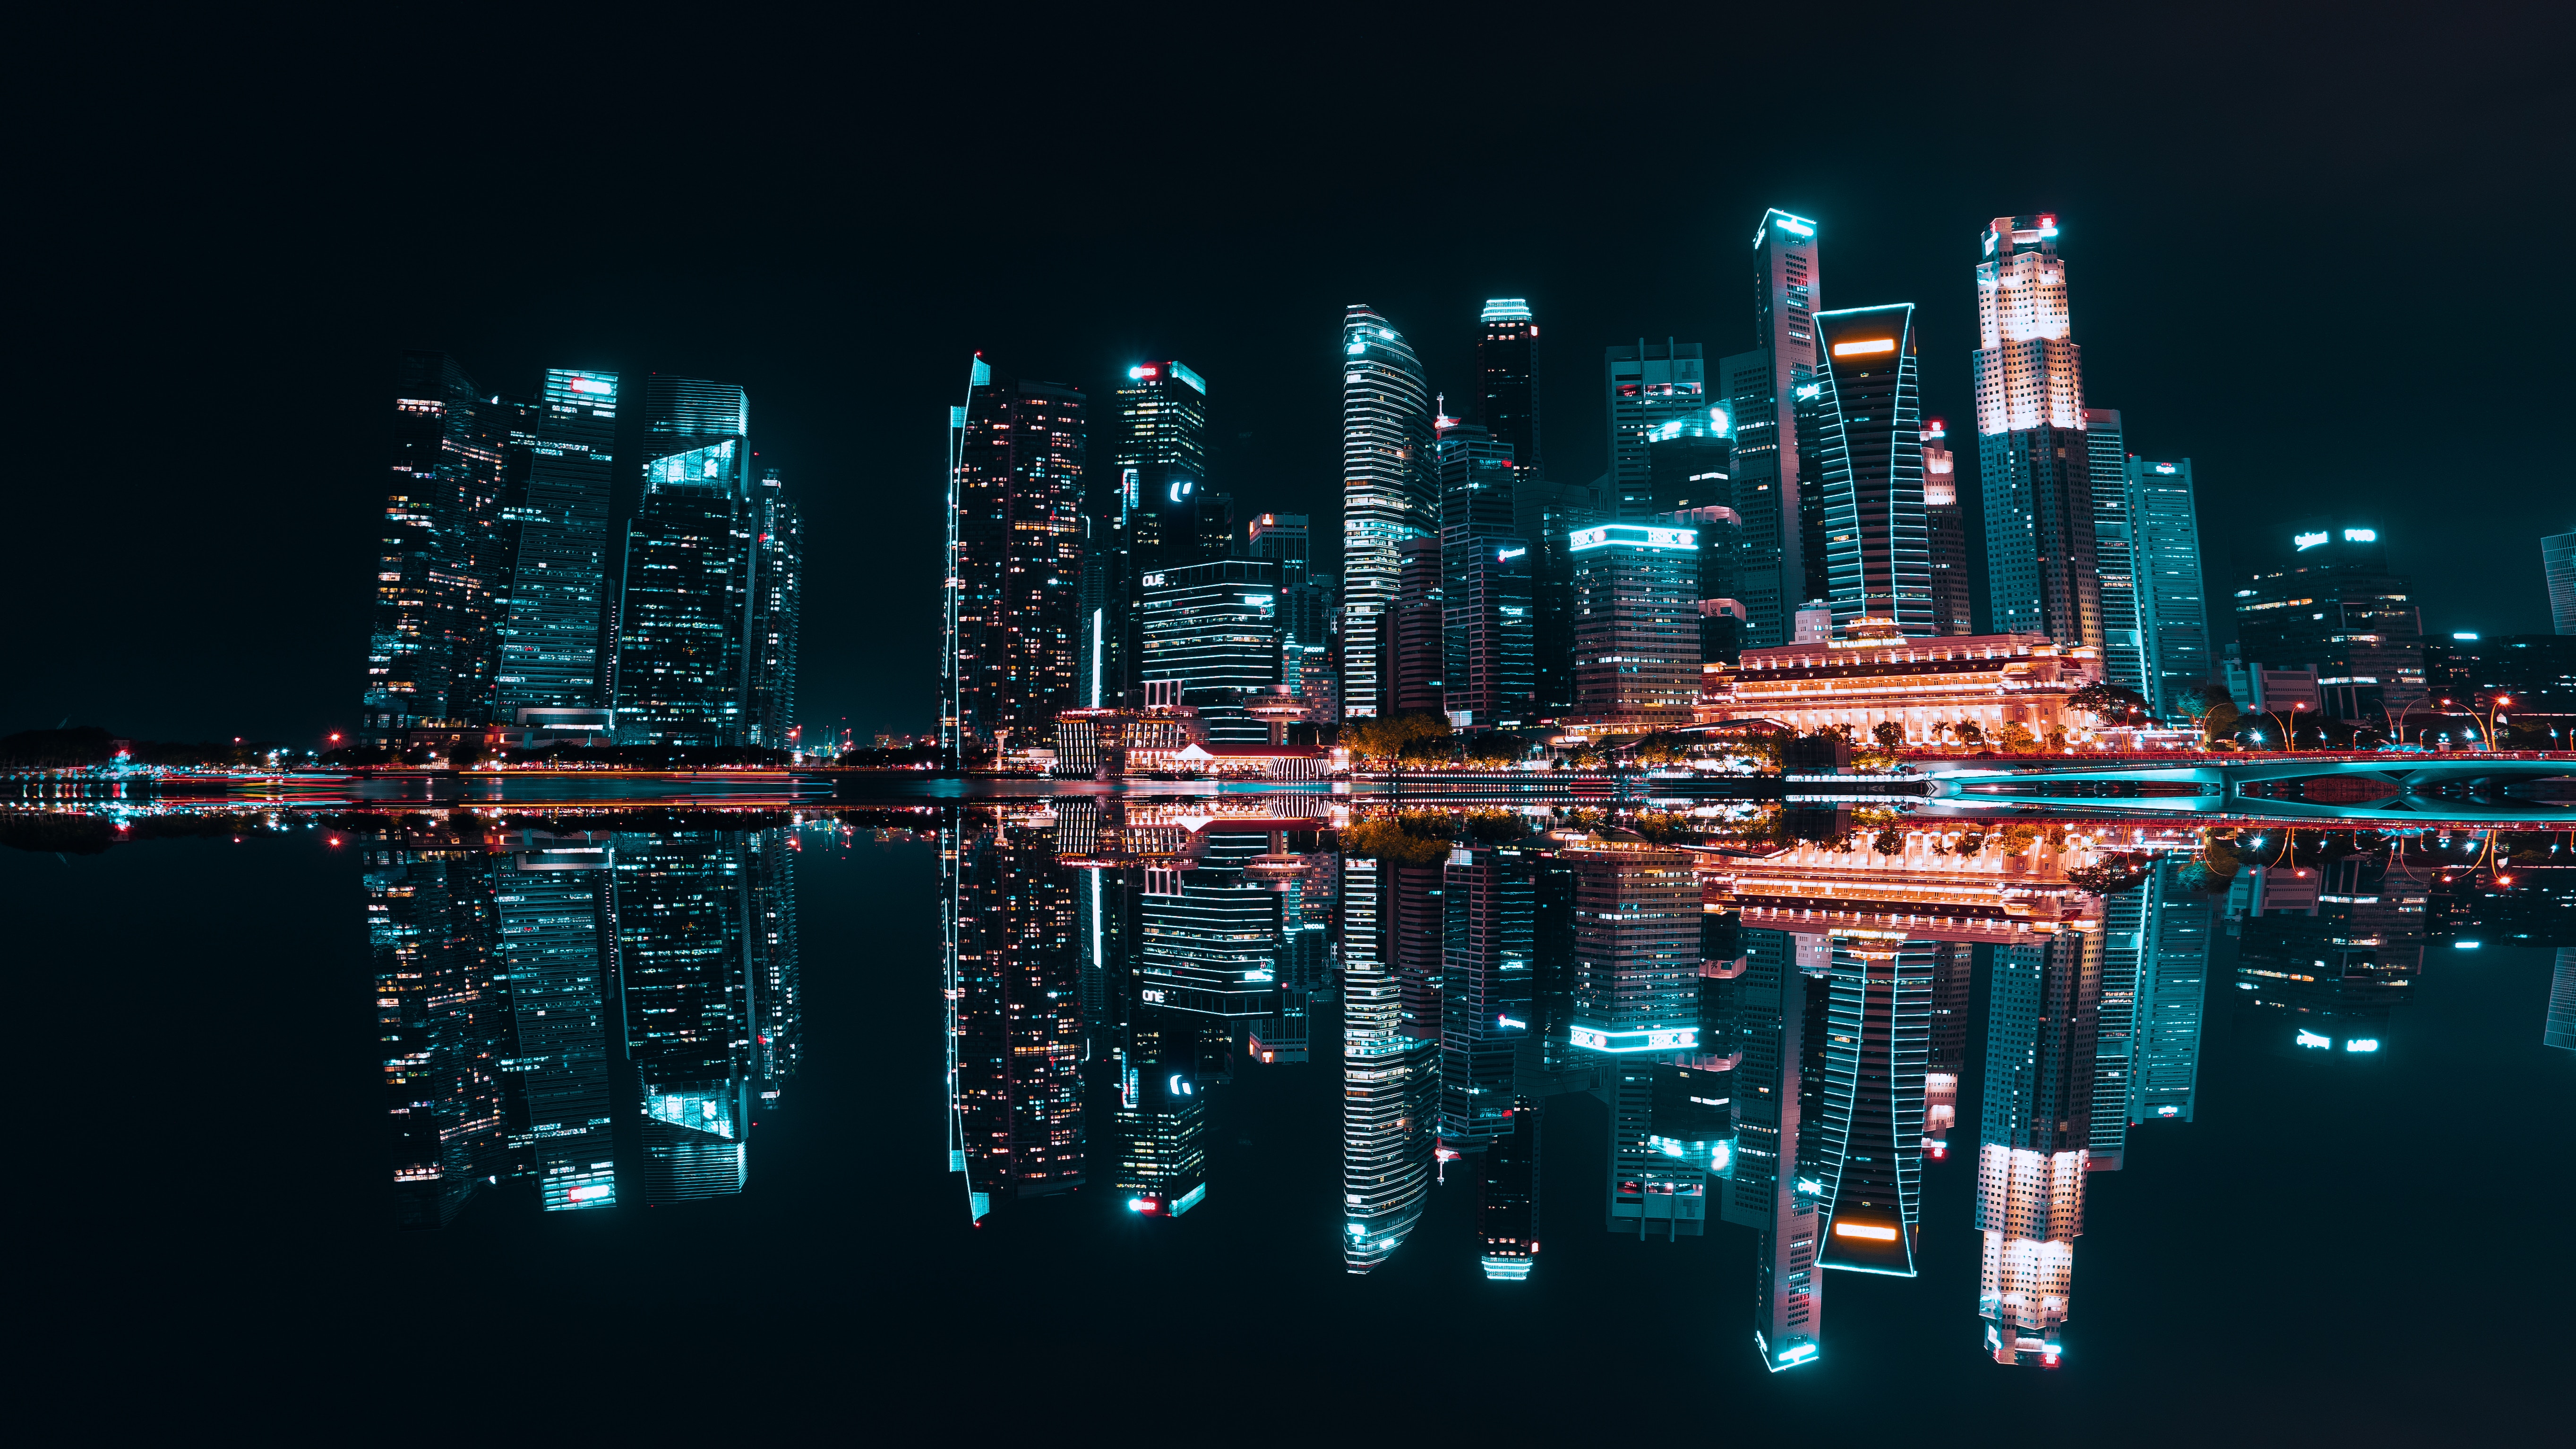 night city, illumination, lake, cities, building, reflection, skyscrapers, backlight, electricity download HD wallpaper